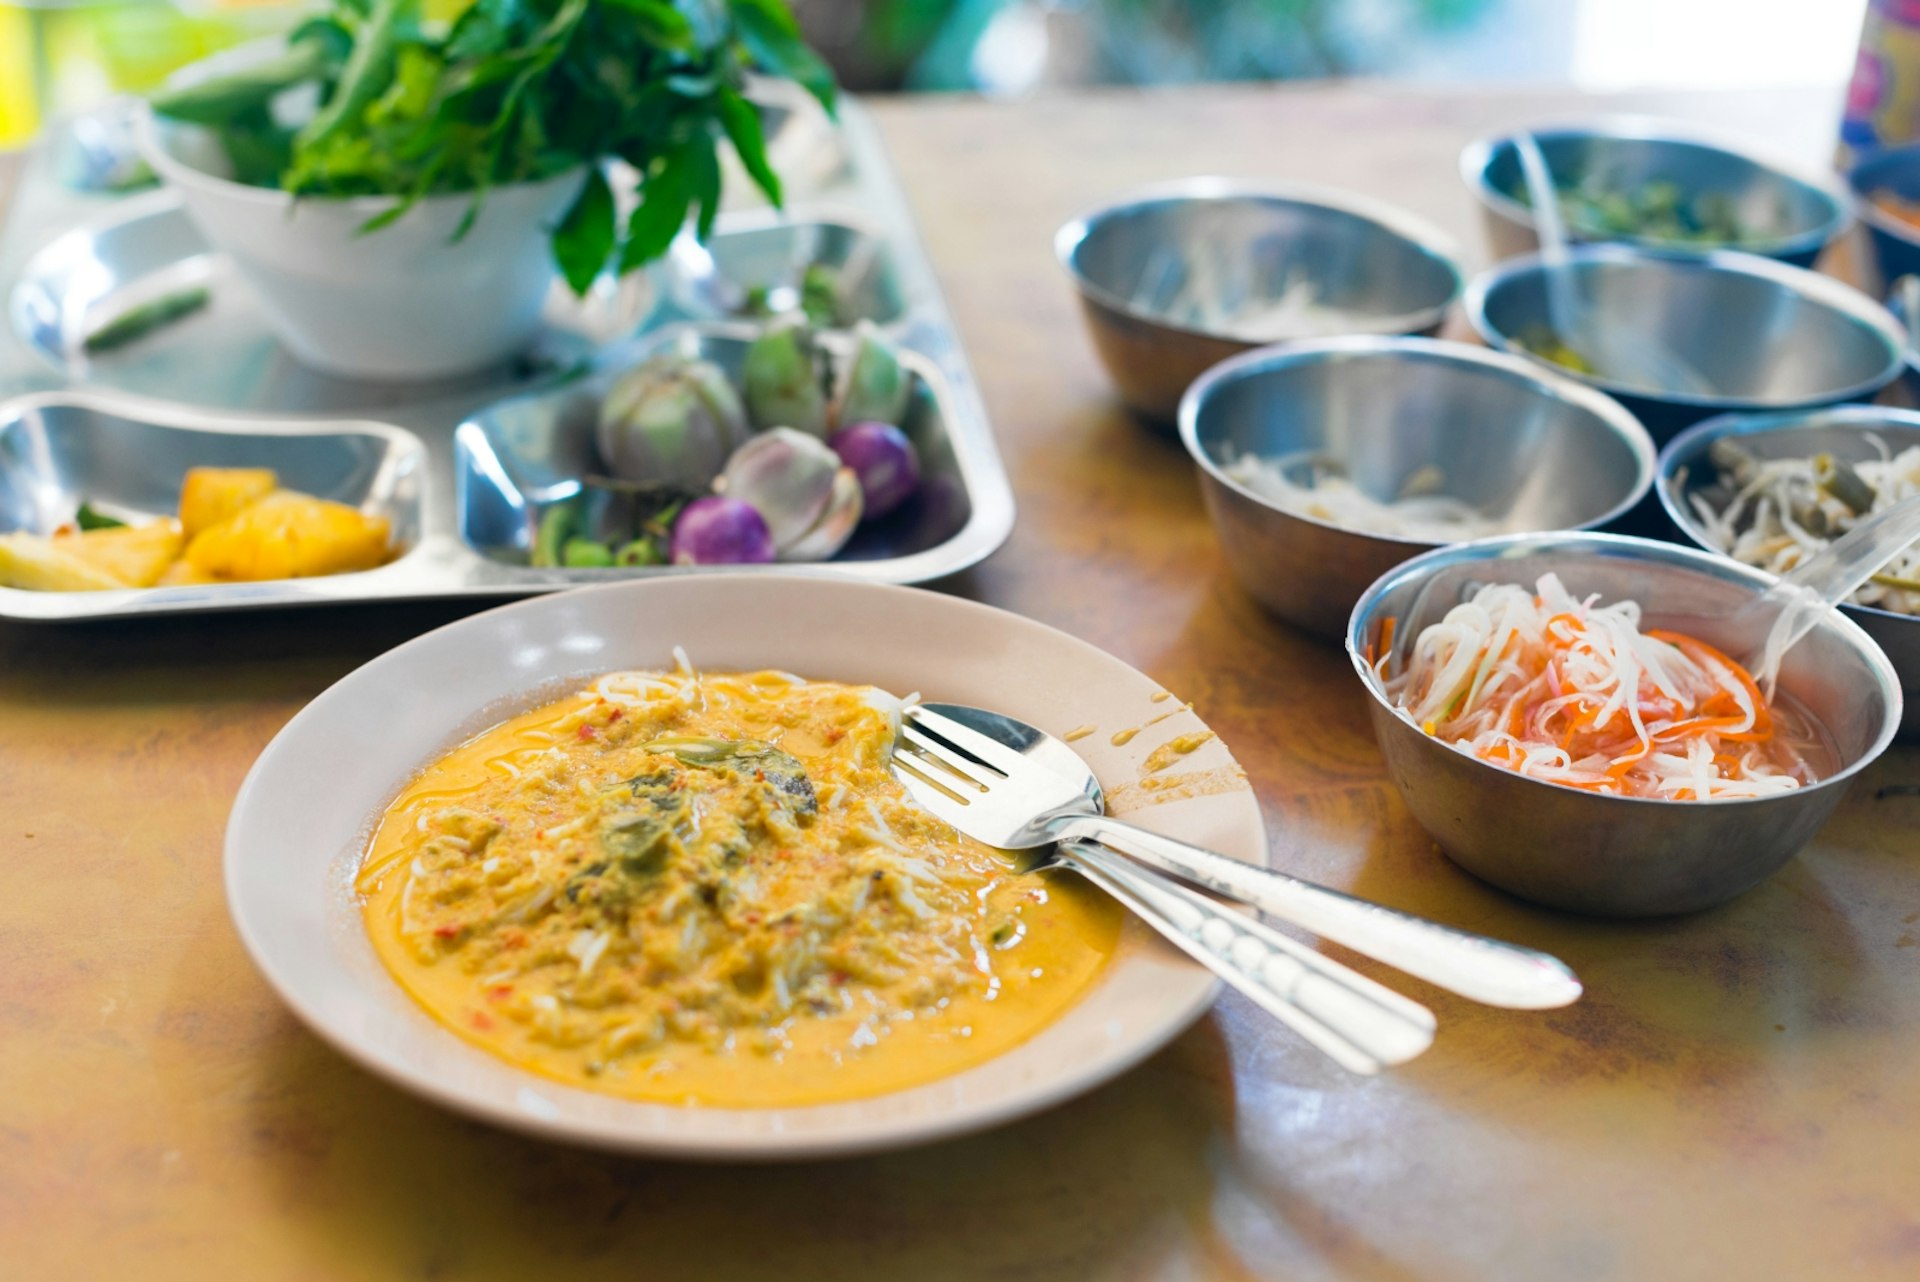 Khanom jeen, a kind of spicy seafood curry, is a typical, beloved breakfast plate in Phuket © Austin Bush / Lonely Planet